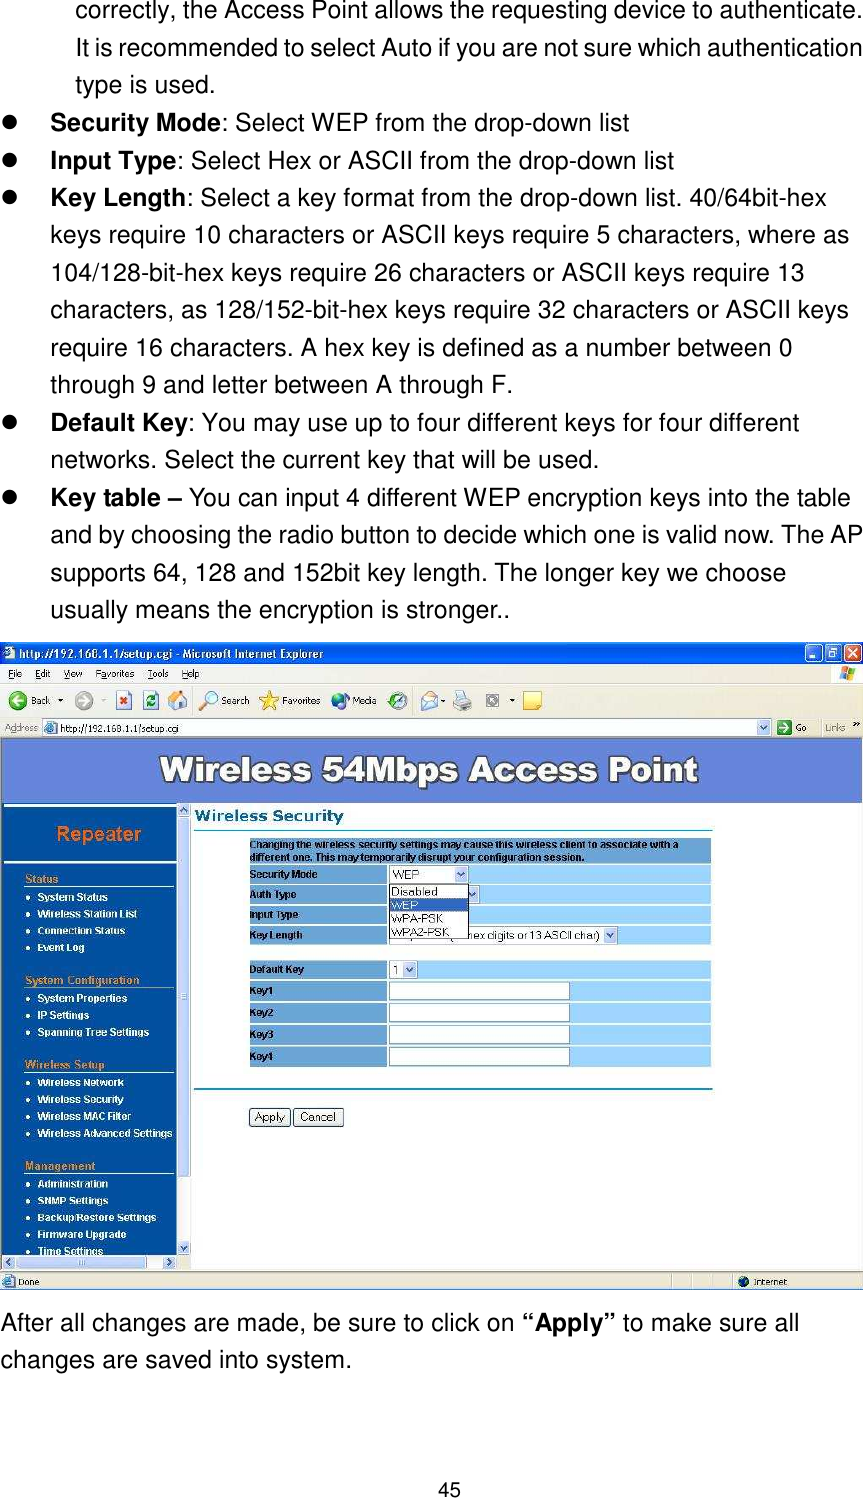  45 correctly, the Access Point allows the requesting device to authenticate. It is recommended to select Auto if you are not sure which authentication type is used.  Security Mode: Select WEP from the drop-down list  Input Type: Select Hex or ASCII from the drop-down list  Key Length: Select a key format from the drop-down list. 40/64bit-hex keys require 10 characters or ASCII keys require 5 characters, where as 104/128-bit-hex keys require 26 characters or ASCII keys require 13 characters, as 128/152-bit-hex keys require 32 characters or ASCII keys require 16 characters. A hex key is defined as a number between 0 through 9 and letter between A through F.  Default Key: You may use up to four different keys for four different networks. Select the current key that will be used.    Key table – You can input 4 different WEP encryption keys into the table and by choosing the radio button to decide which one is valid now. The AP supports 64, 128 and 152bit key length. The longer key we choose usually means the encryption is stronger..  After all changes are made, be sure to click on “Apply” to make sure all changes are saved into system.  